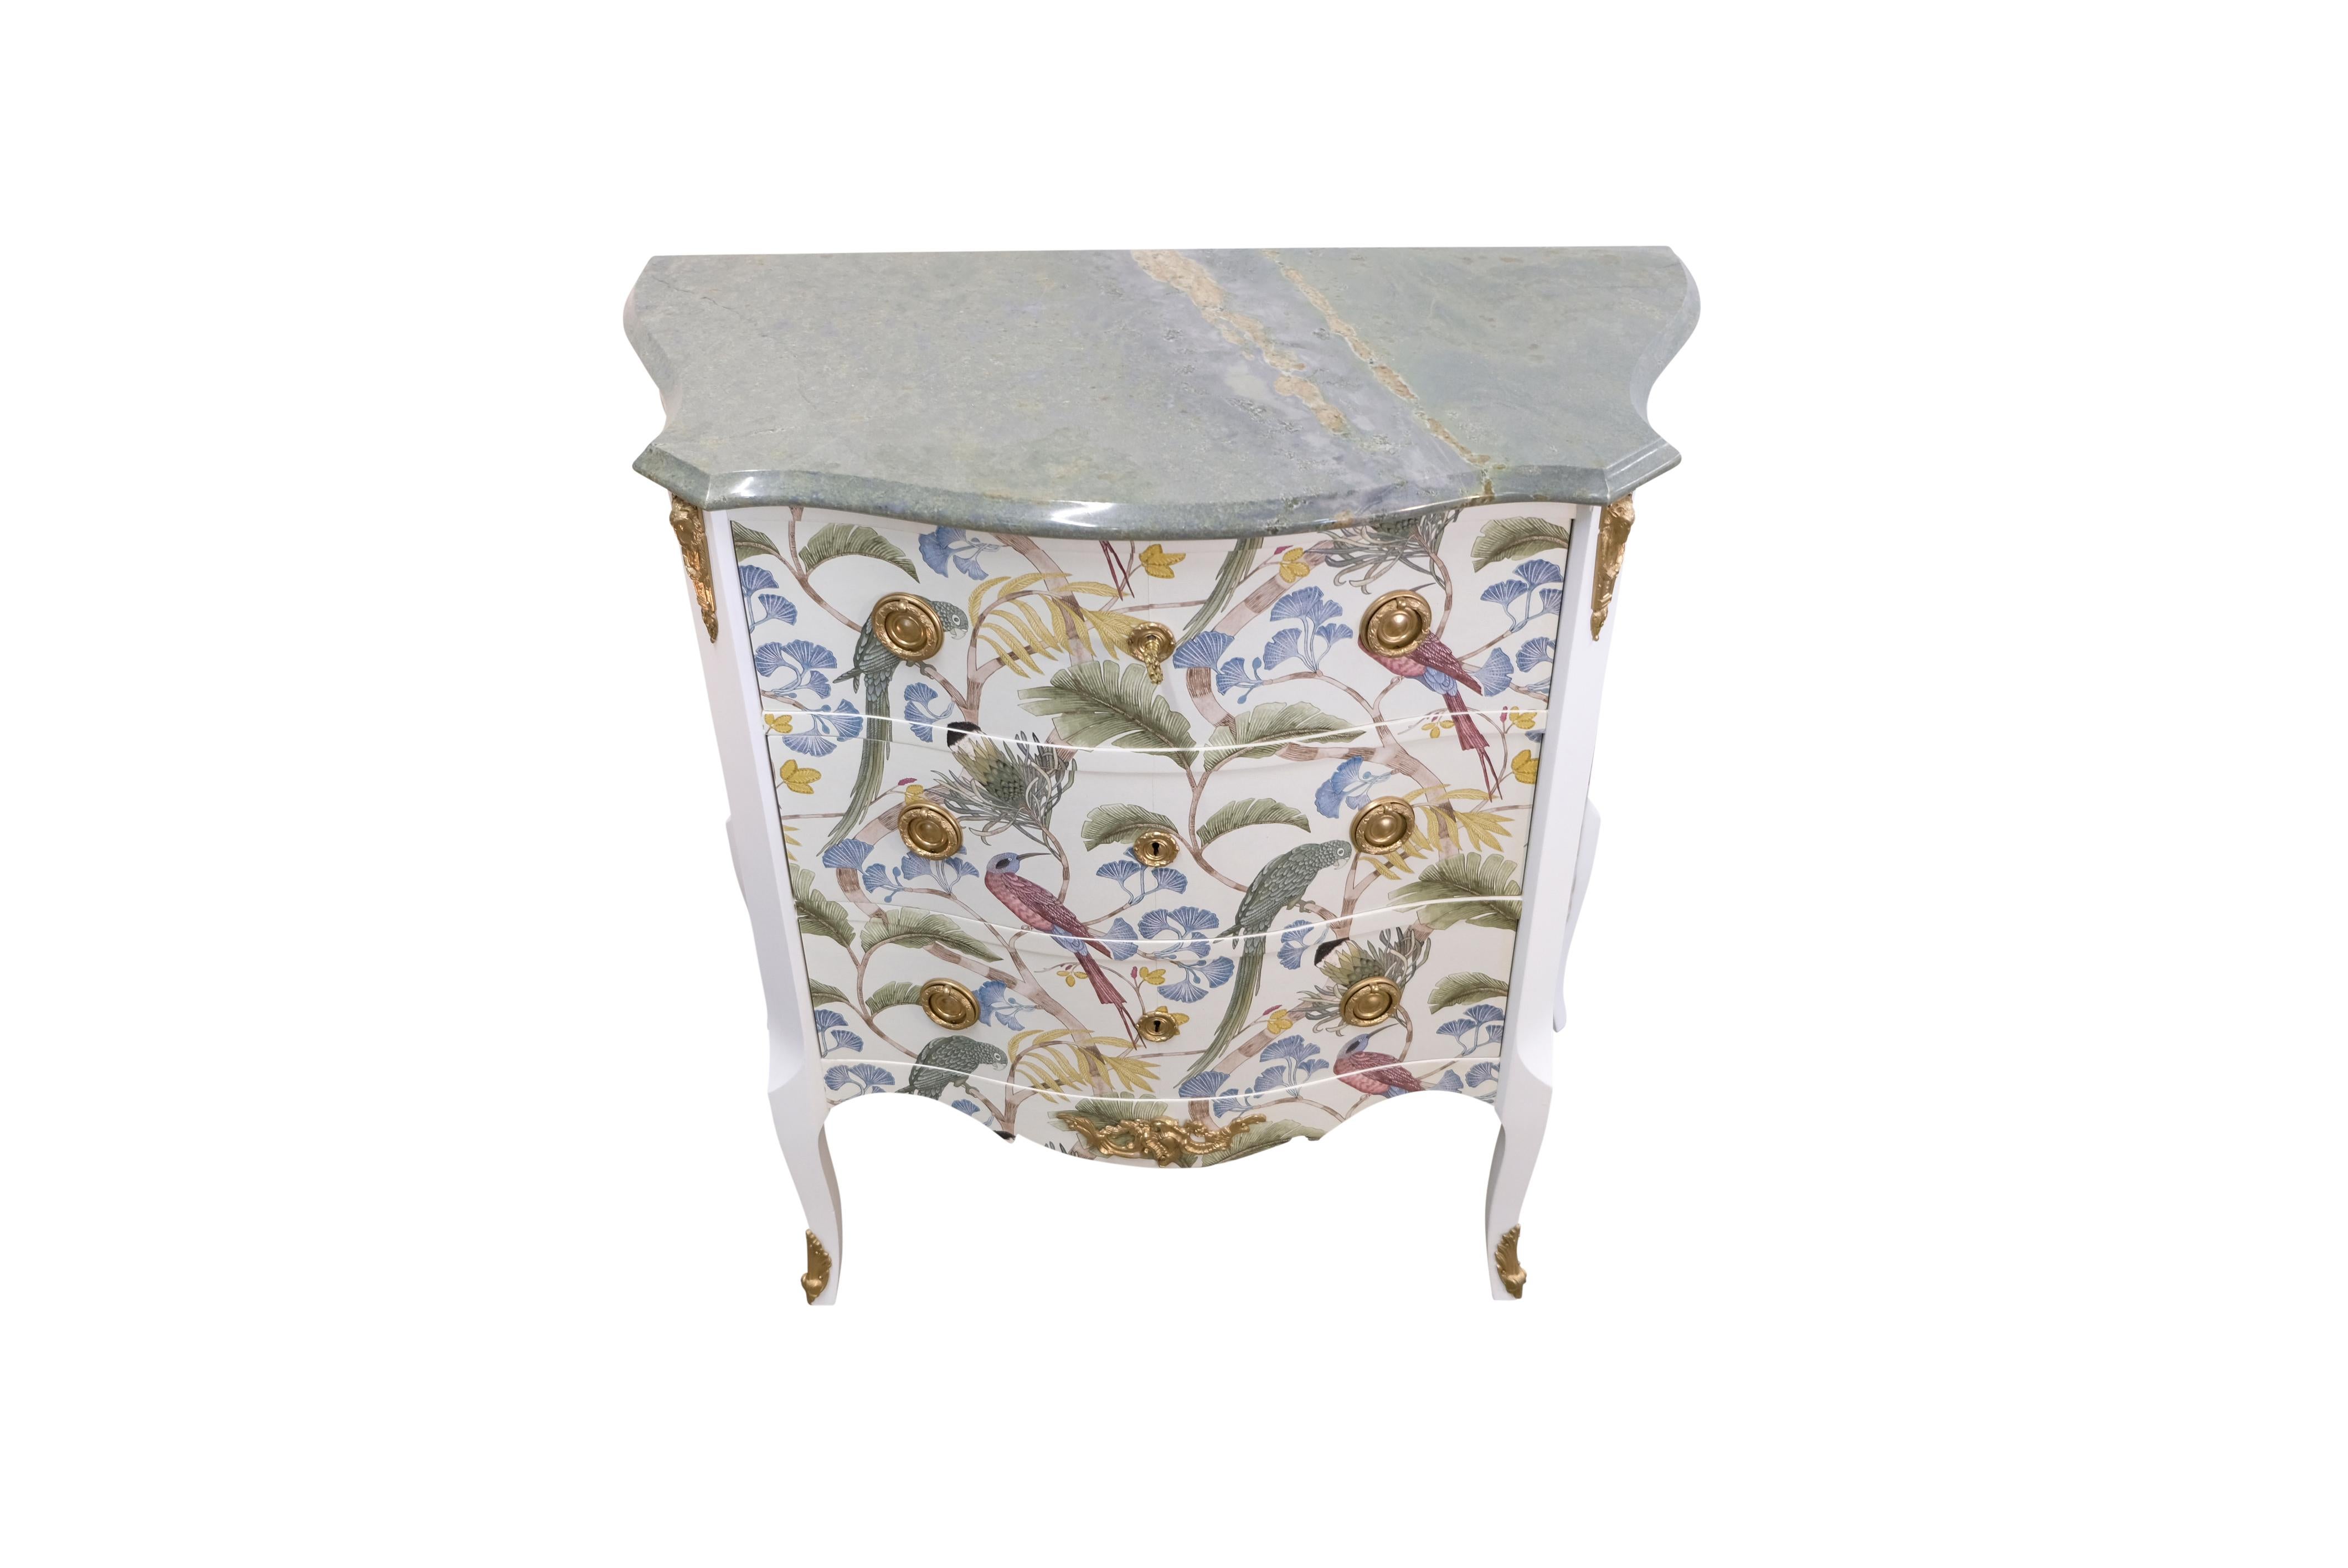 European Gustavian Style Commode in Antique White with Exotic Birds Design and Marble Top